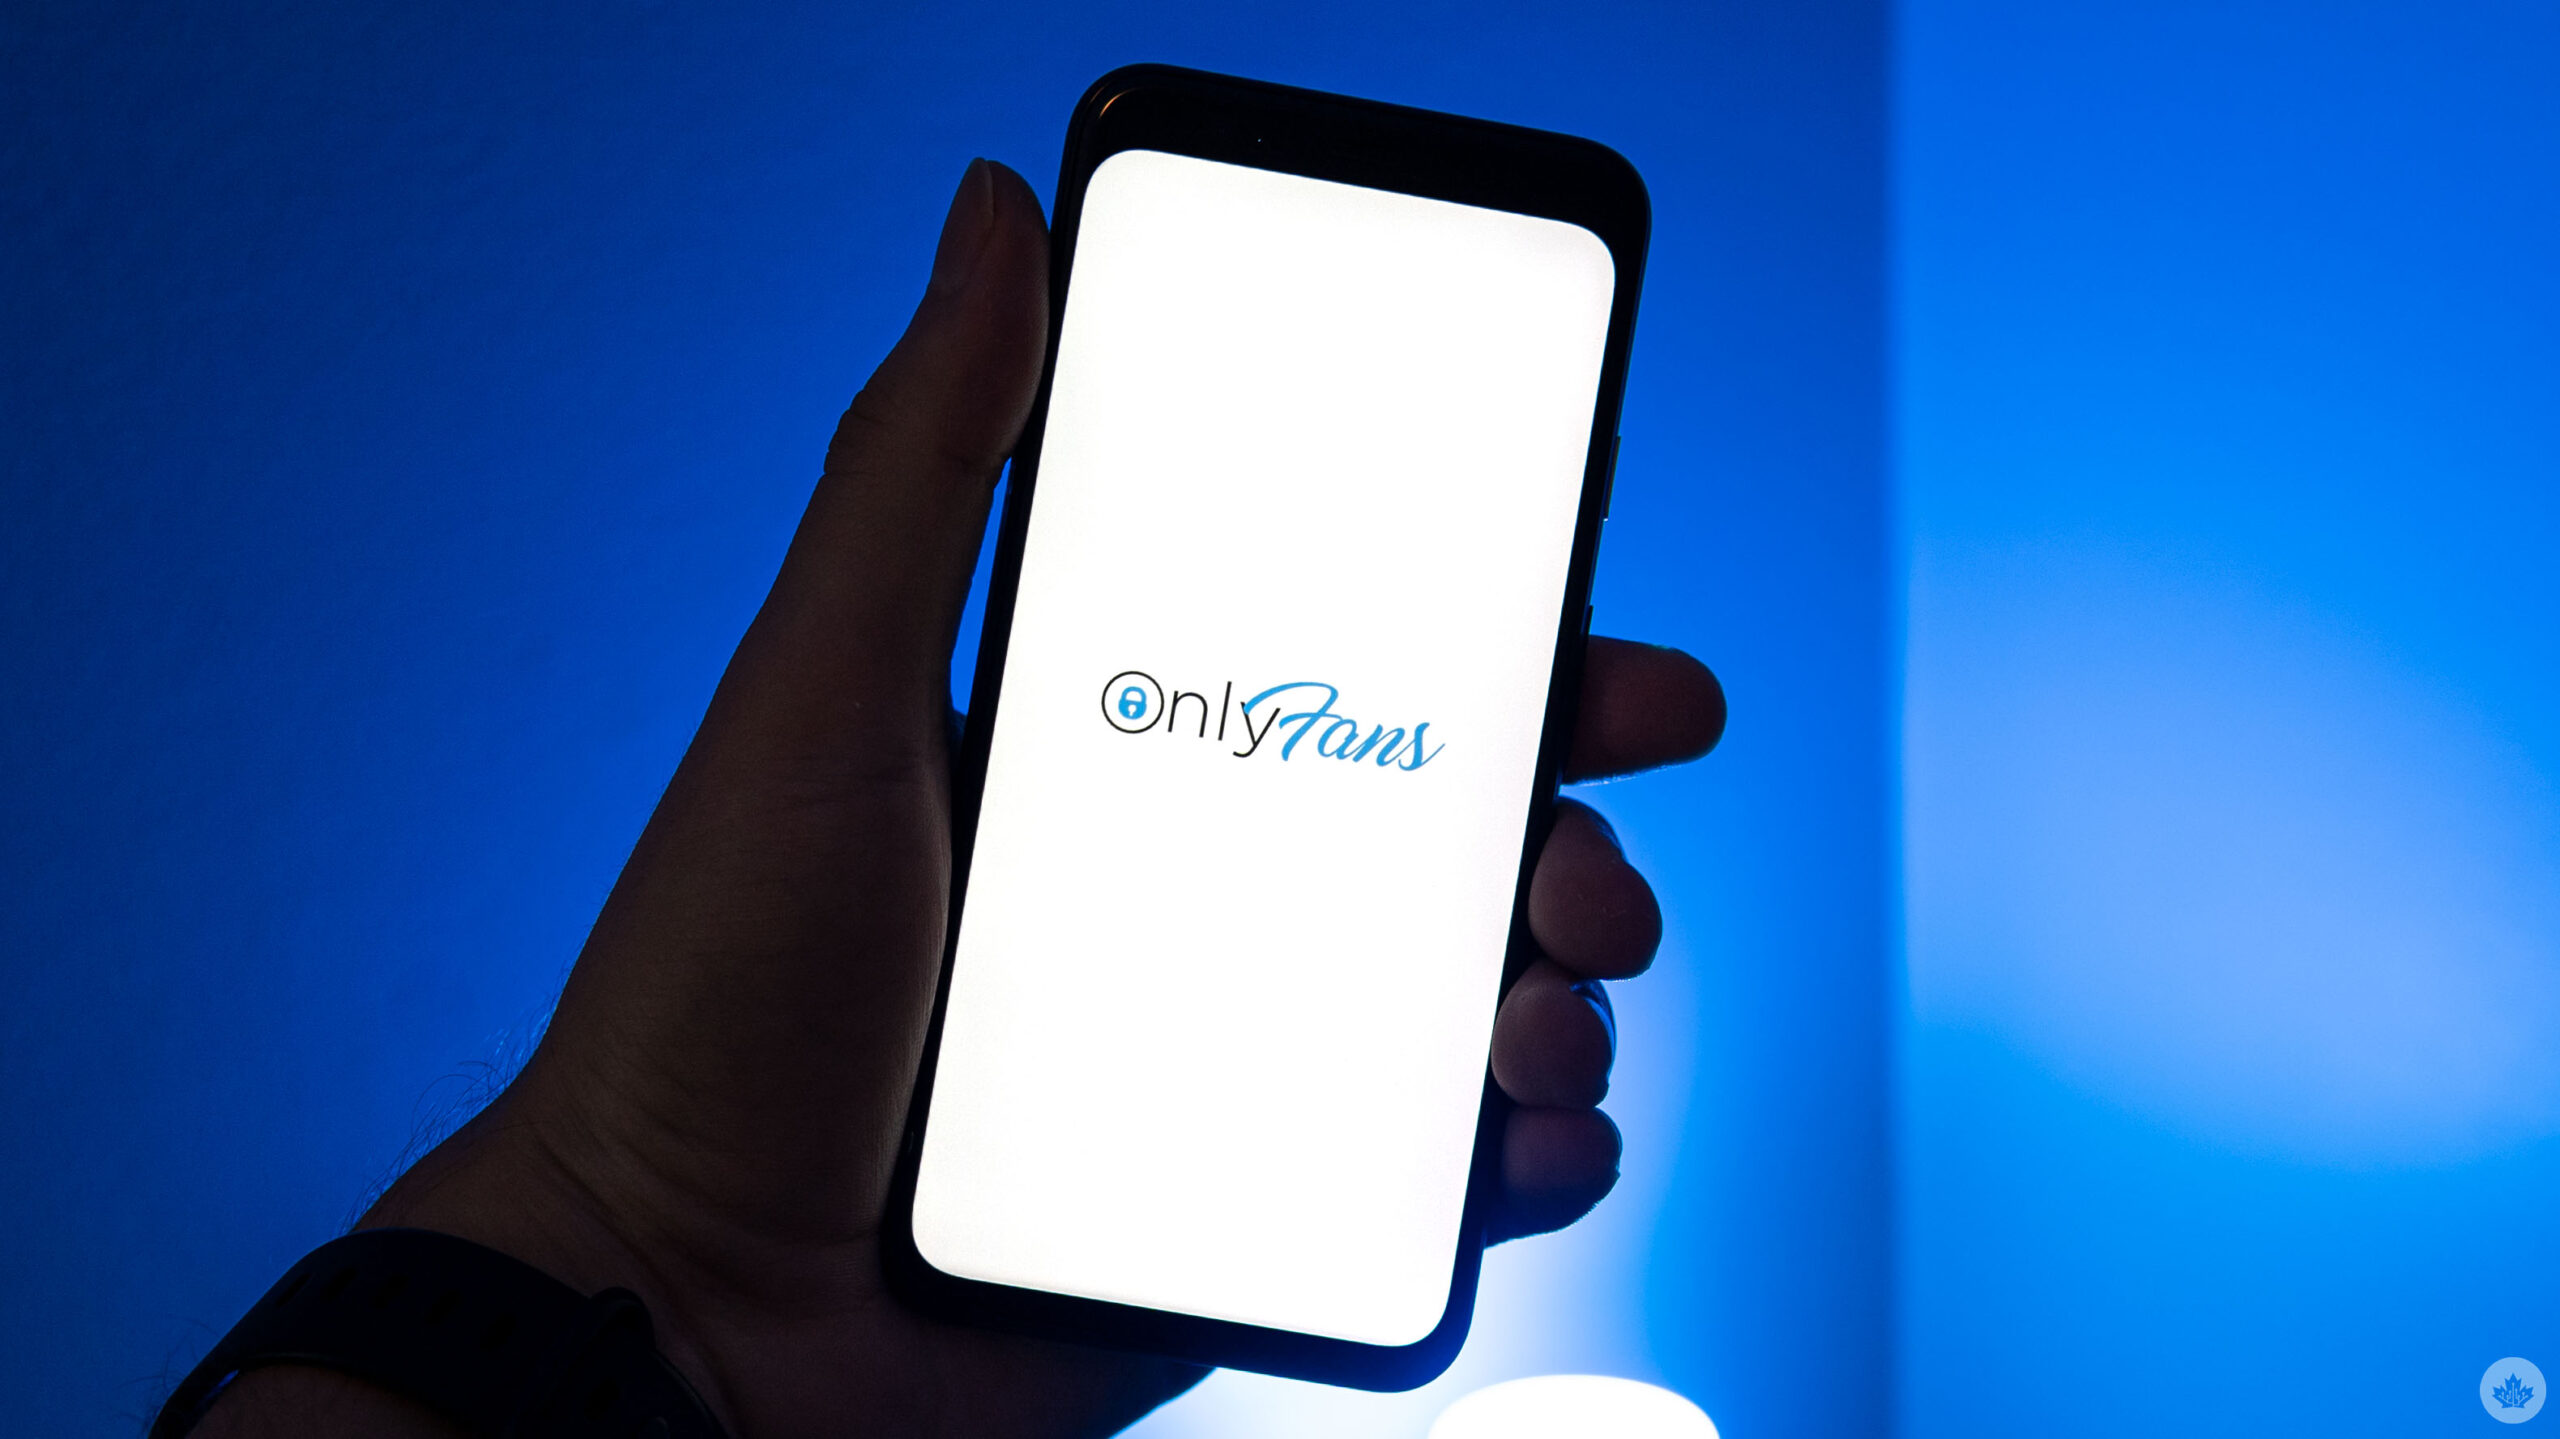 OnlyFans logo on a smartphone